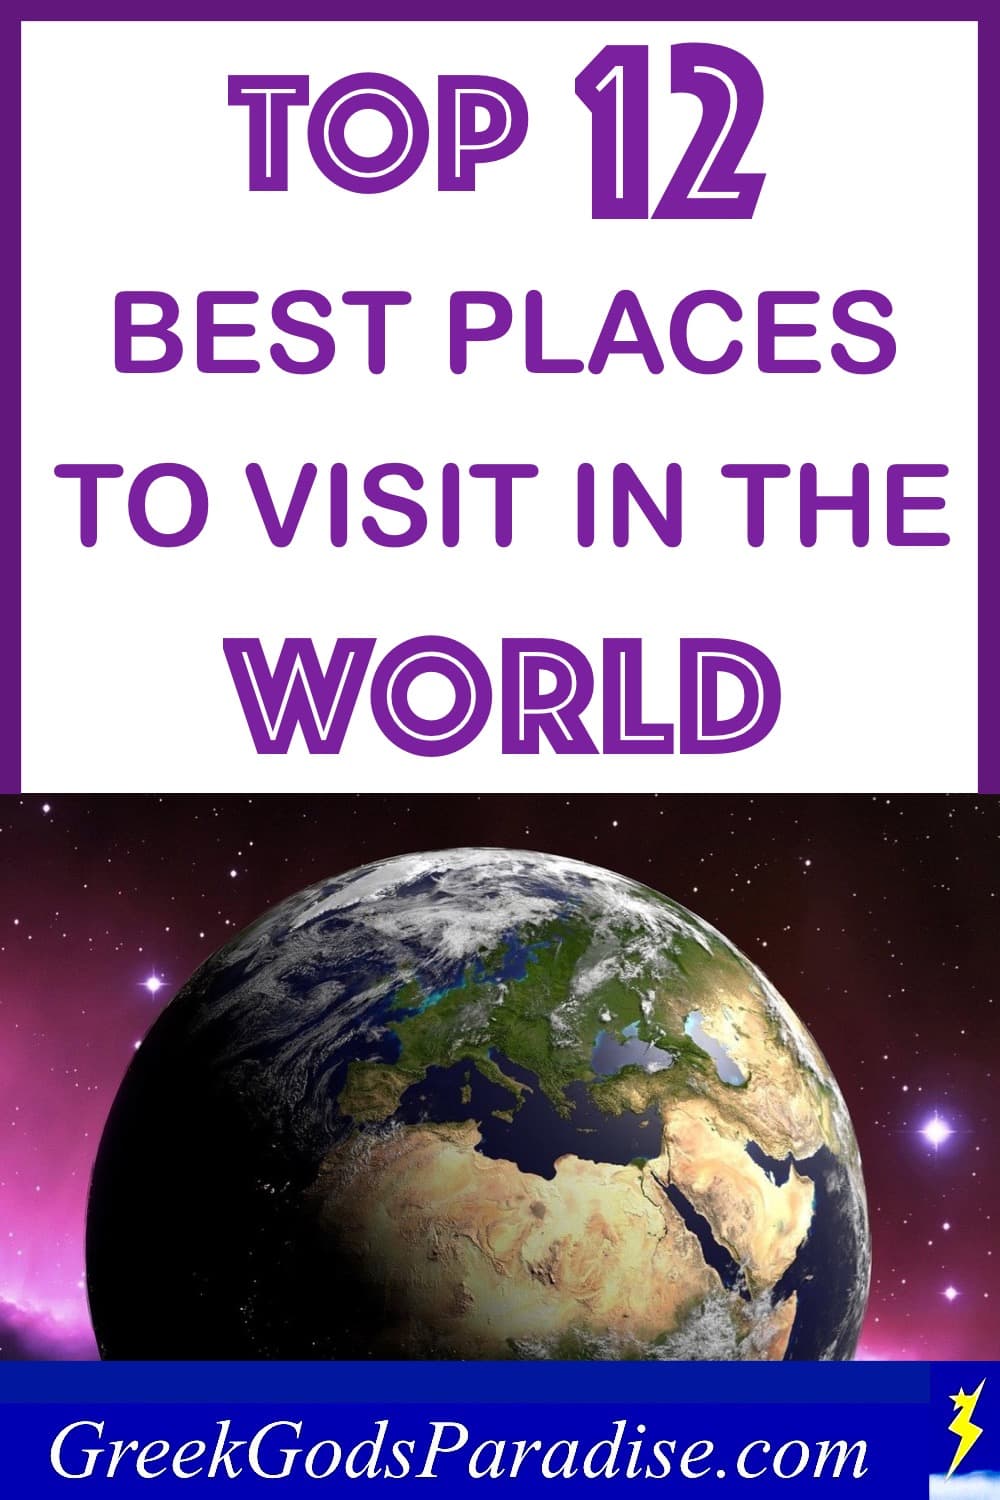 Top 12 Best Places to visit in the World